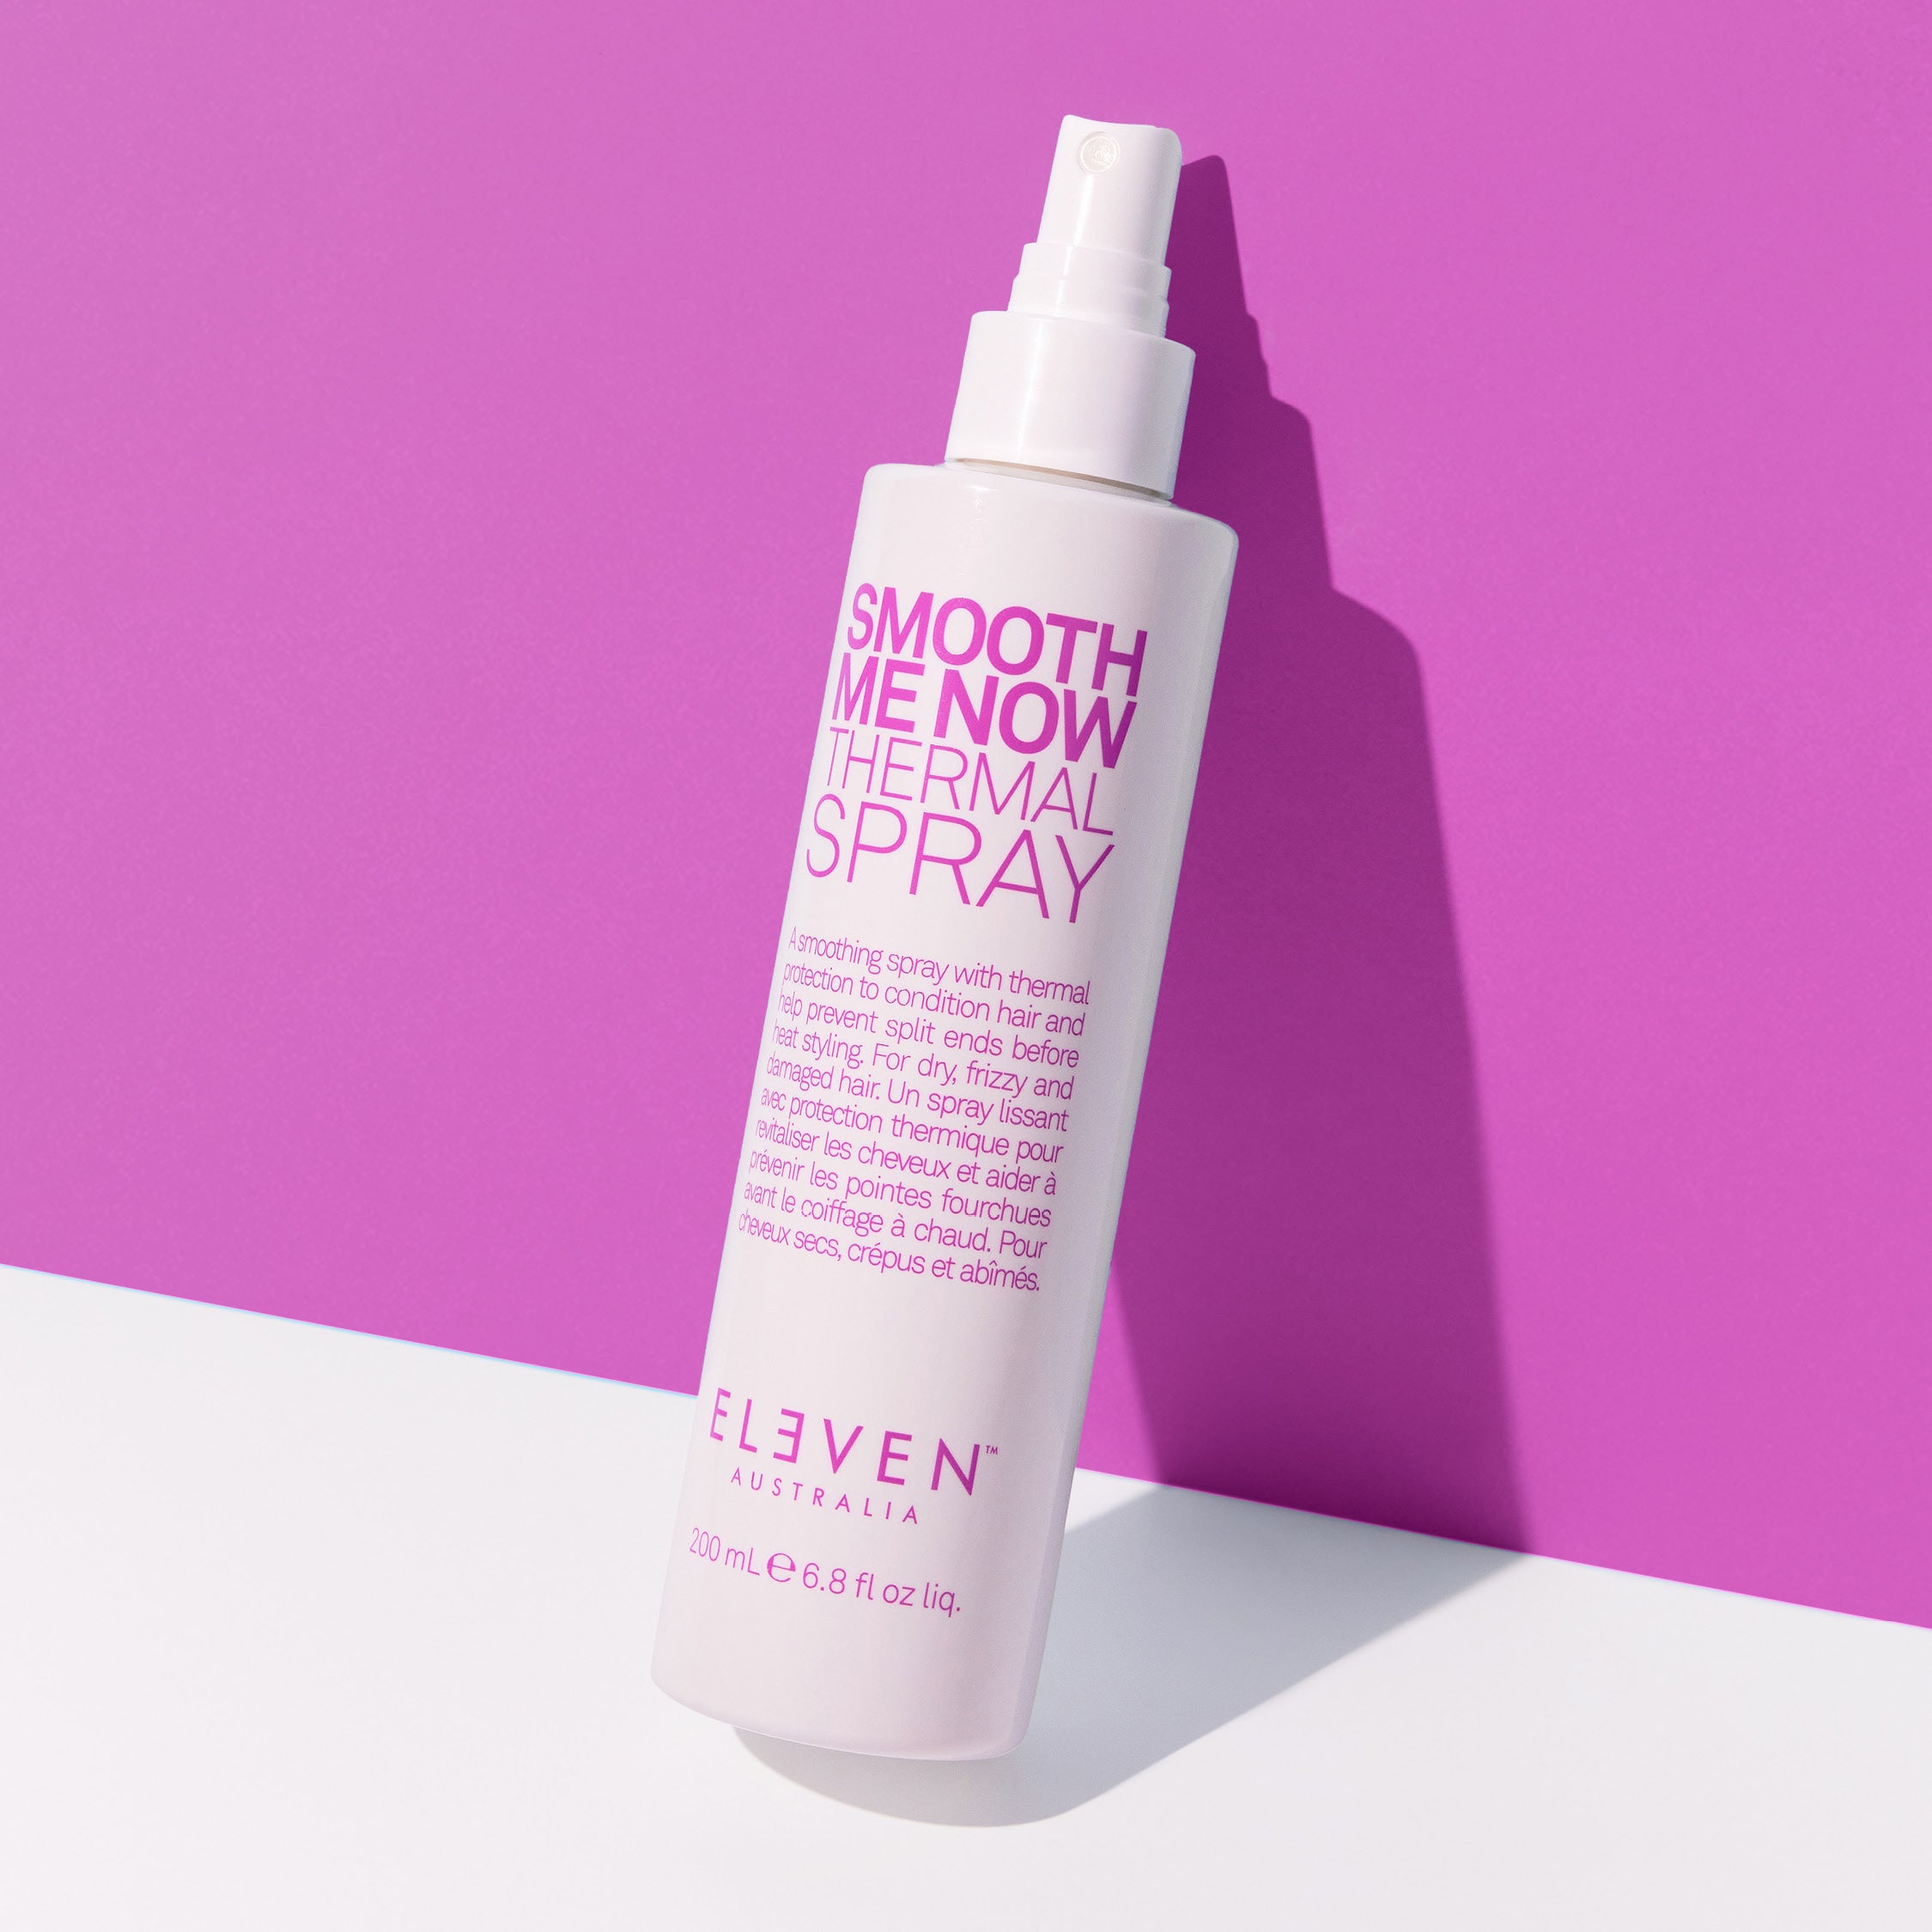 SMOOTH ME NOW THERMAL SPRAY